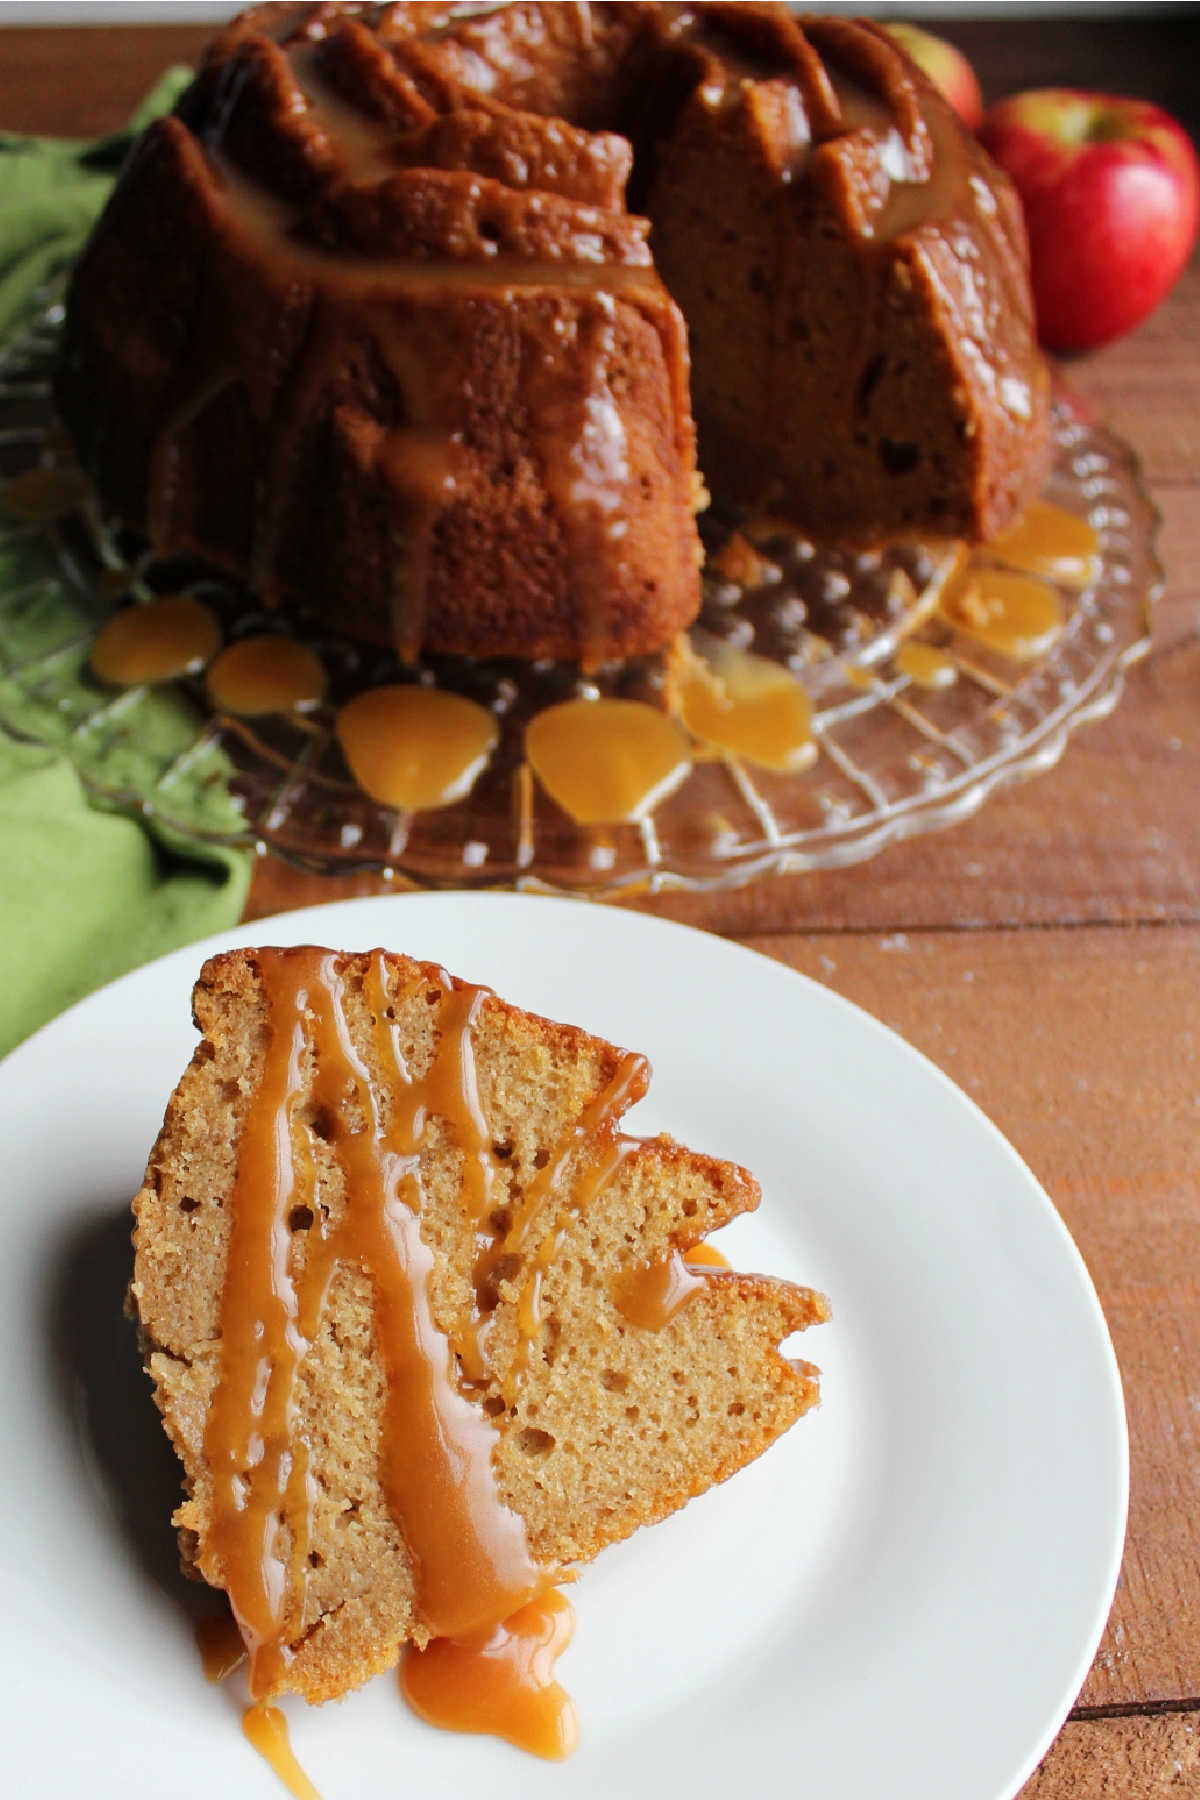 Slice of apple bundt cake served with a drizzle of extra caramel sauce.